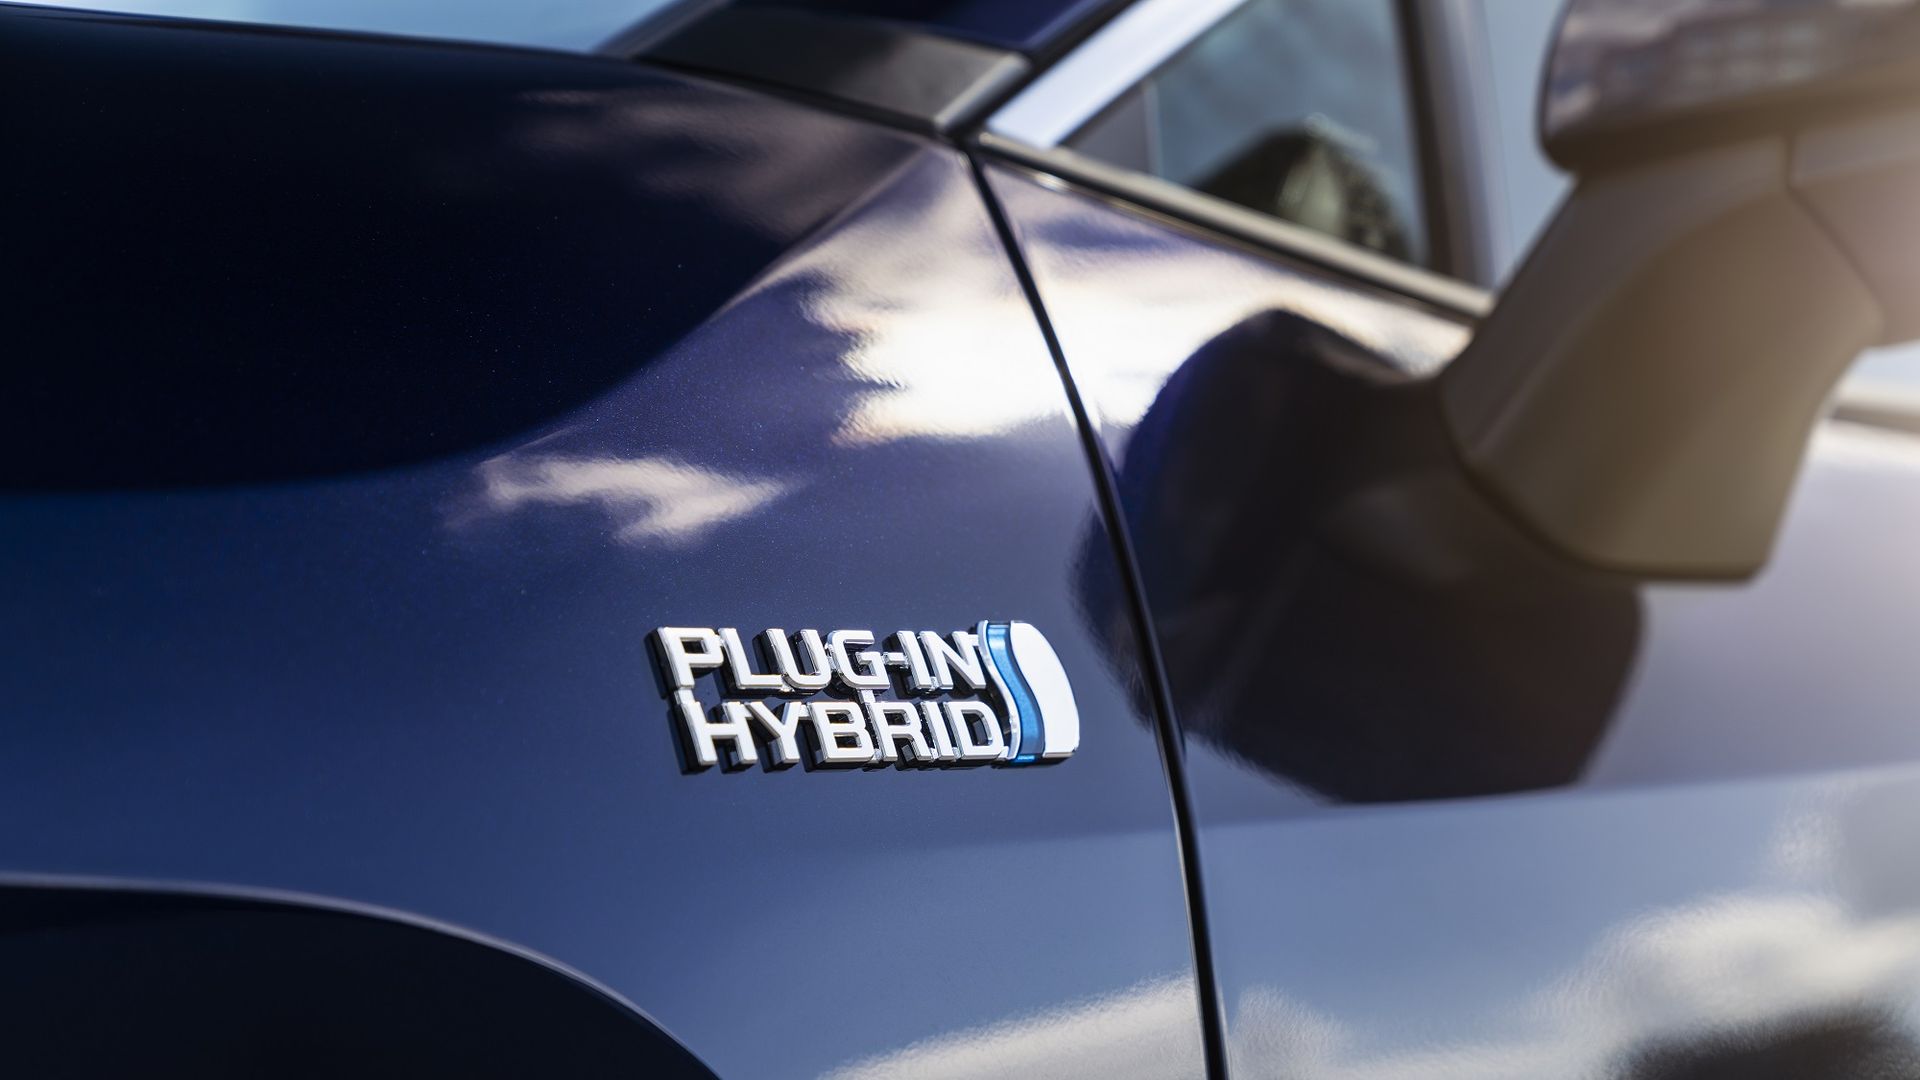 close-up of the words "Plug-in hybrid" on a 2021 Toyota Rav4 Prime